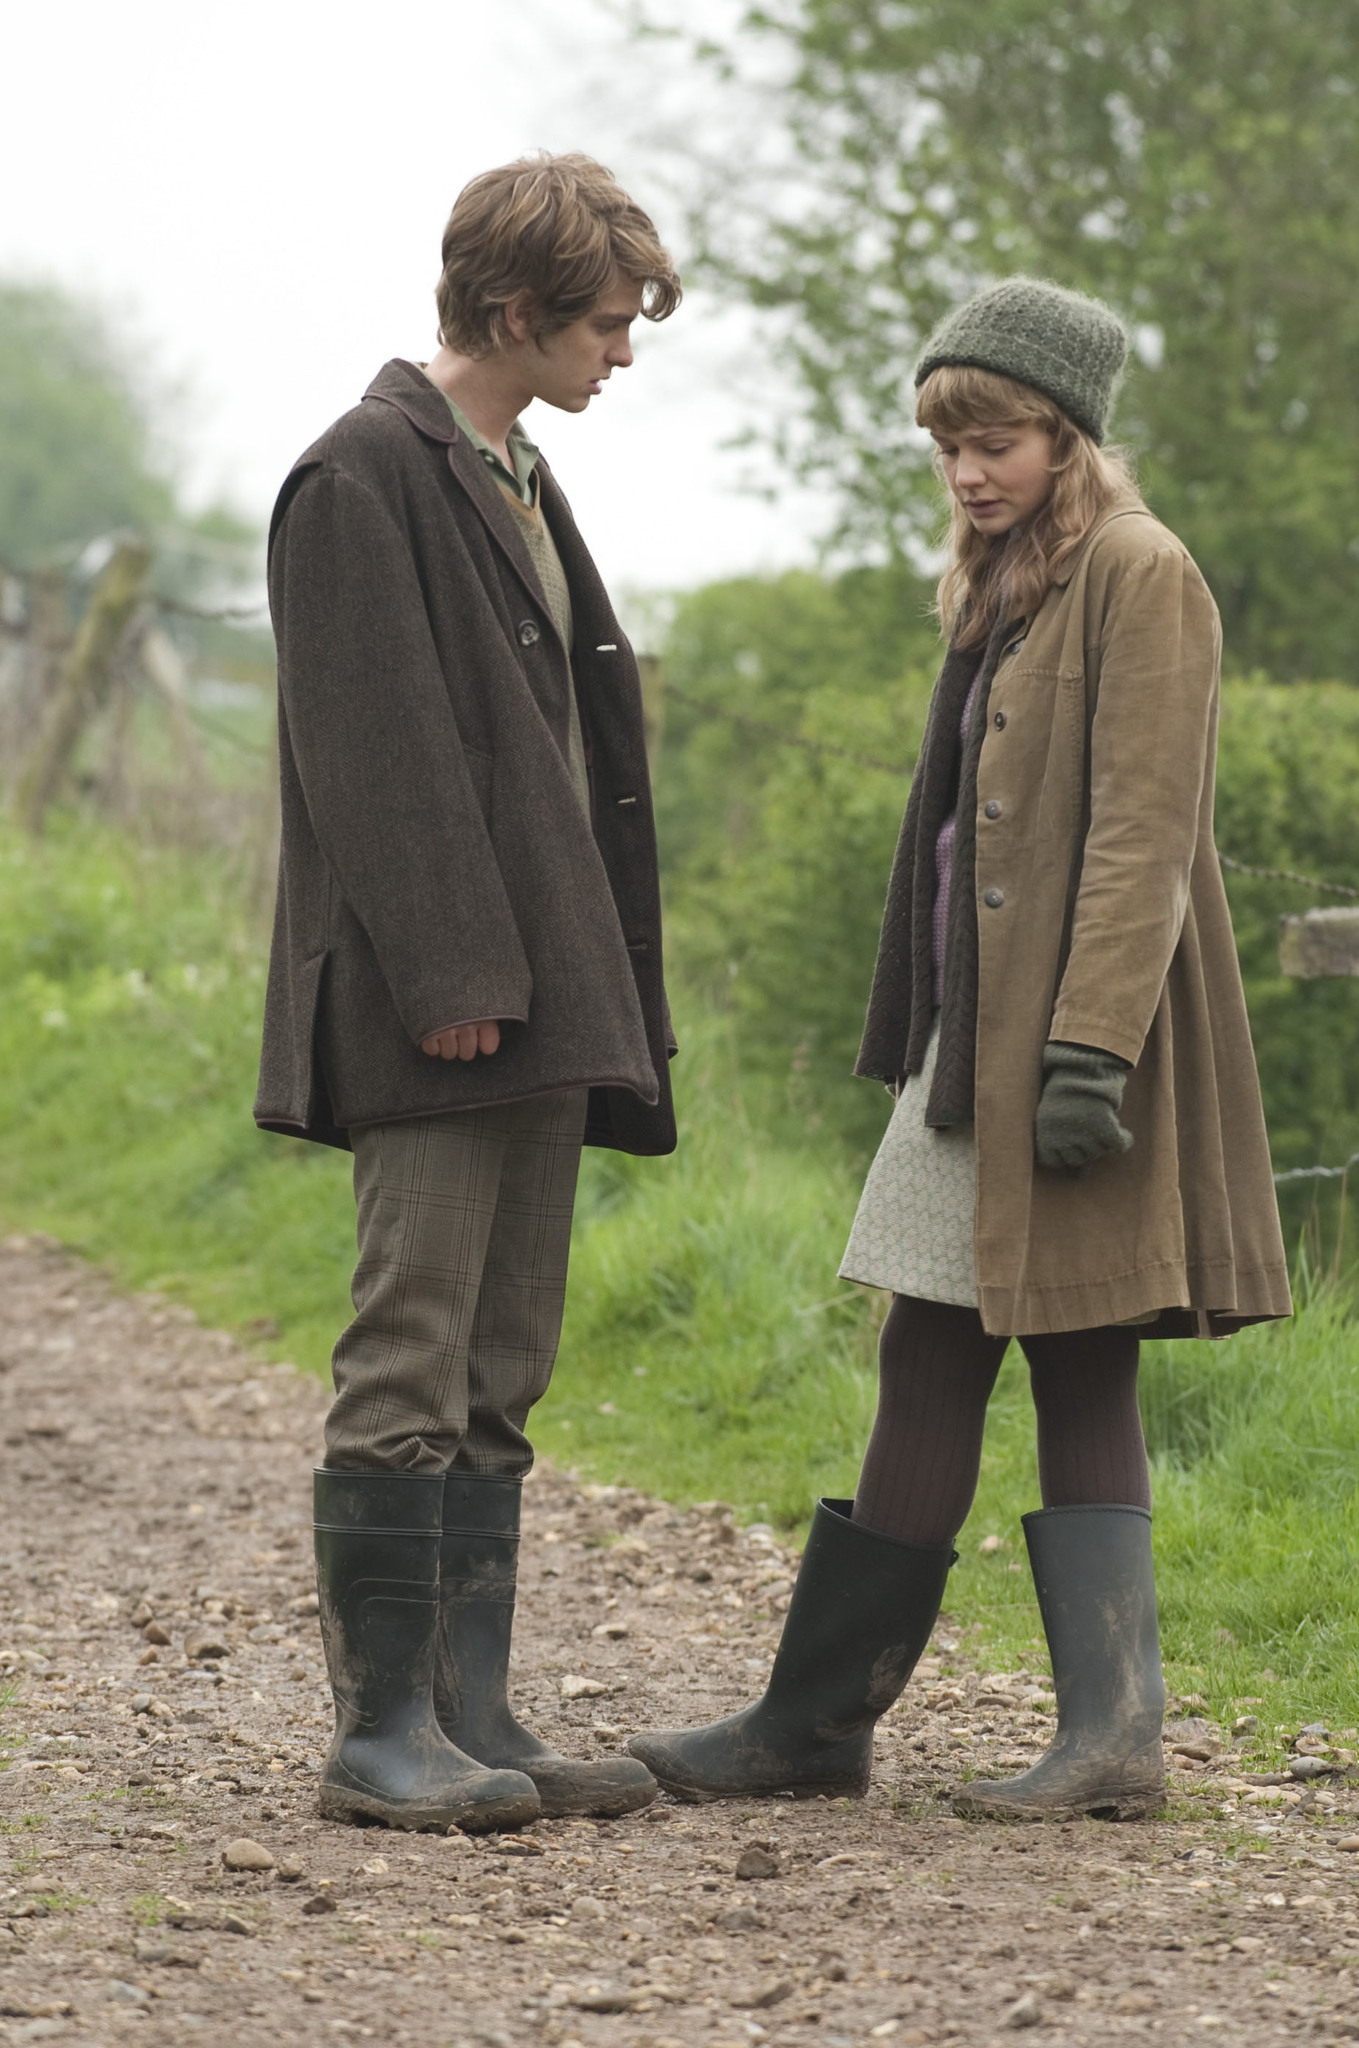 Still of Carey Mulligan and Andrew Garfield in Never Let Me Go (2010)